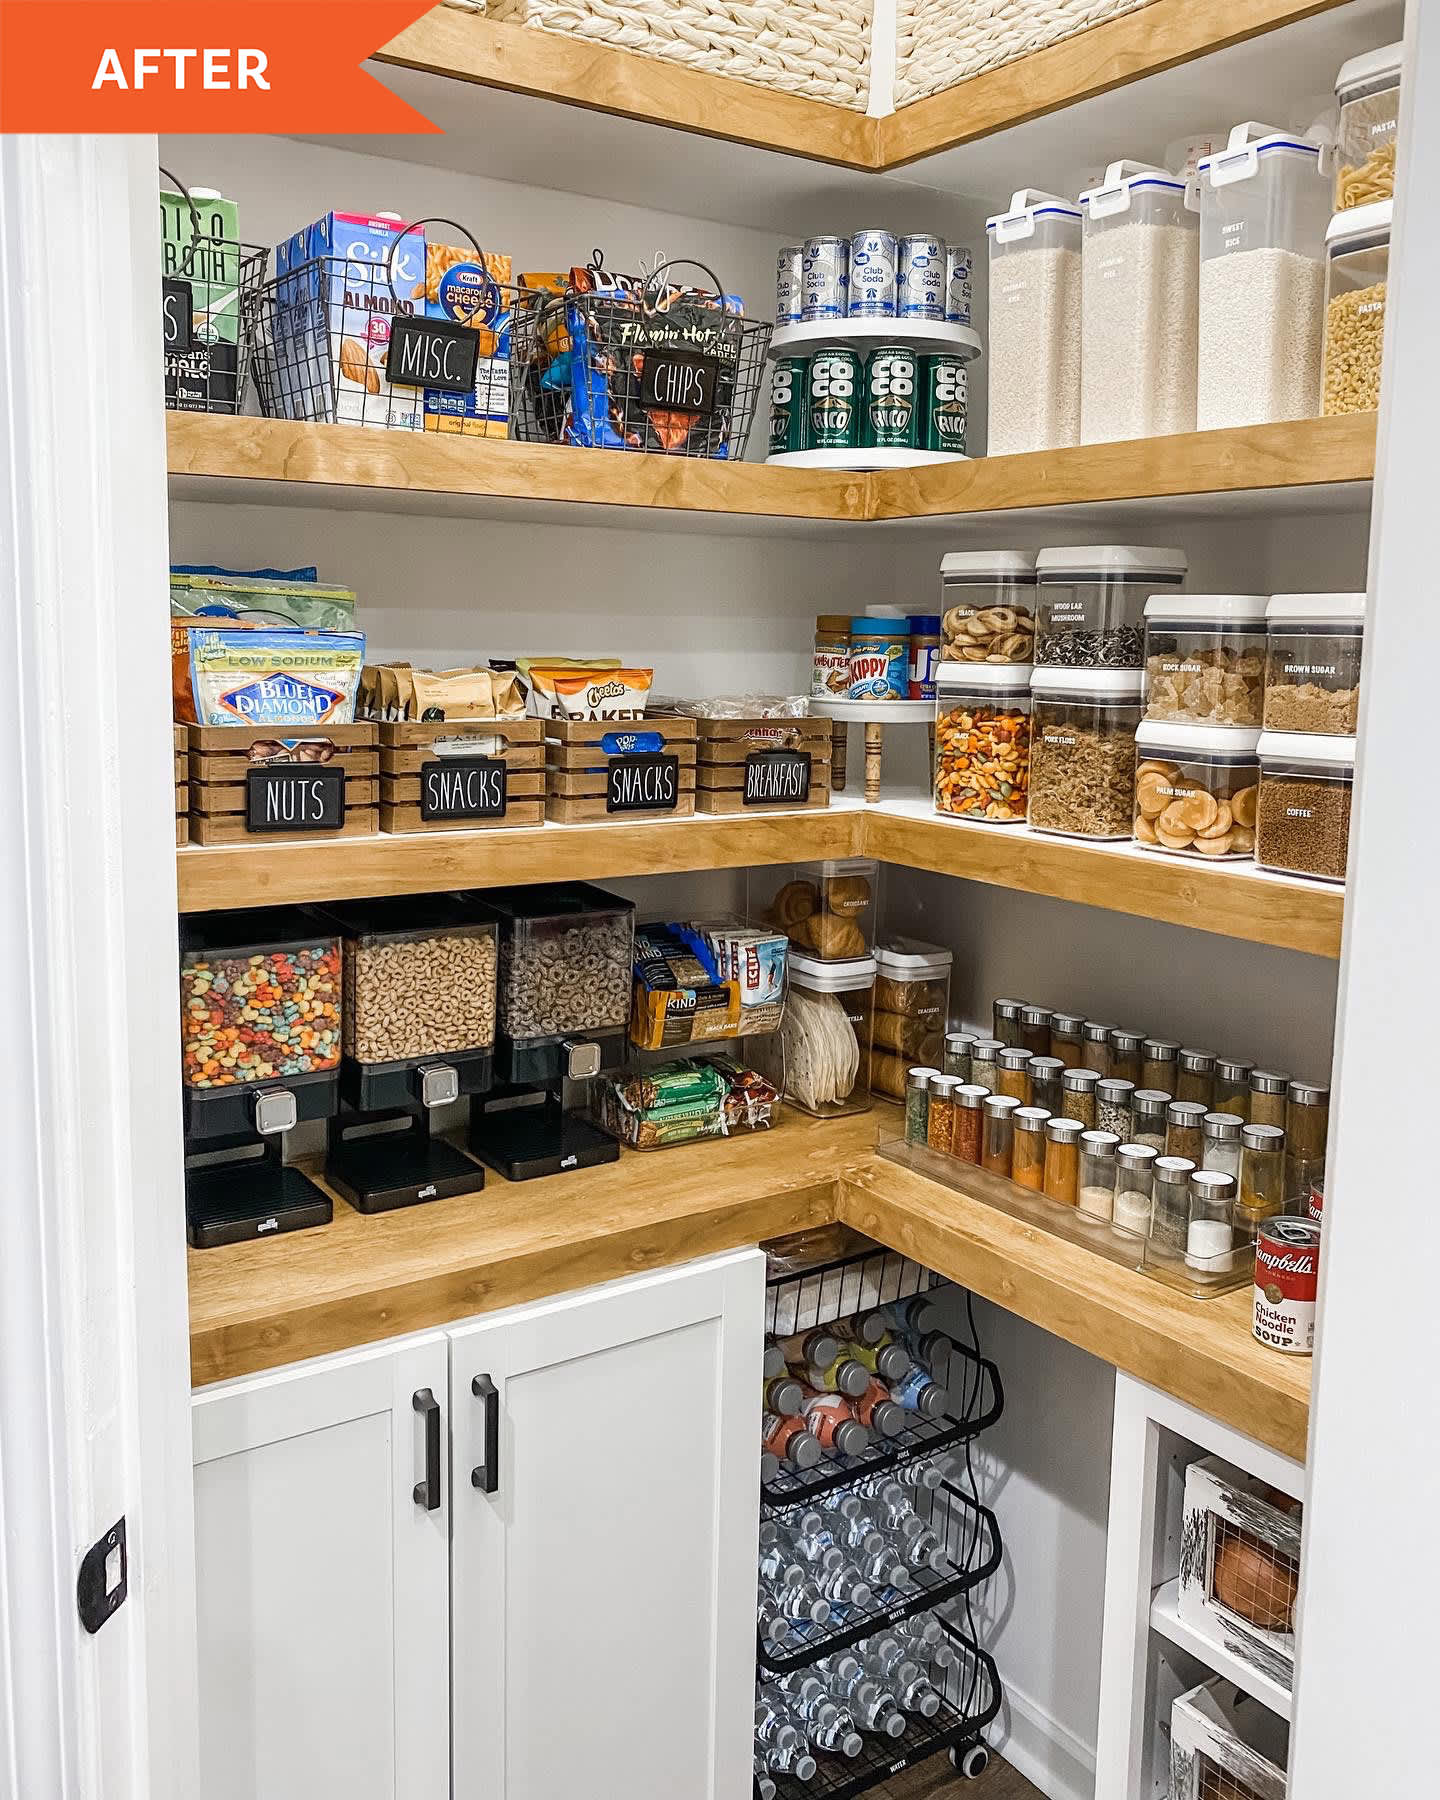 Nine Ideas to Organize a Small Pantry with Wire Shelving - Kelley Nan